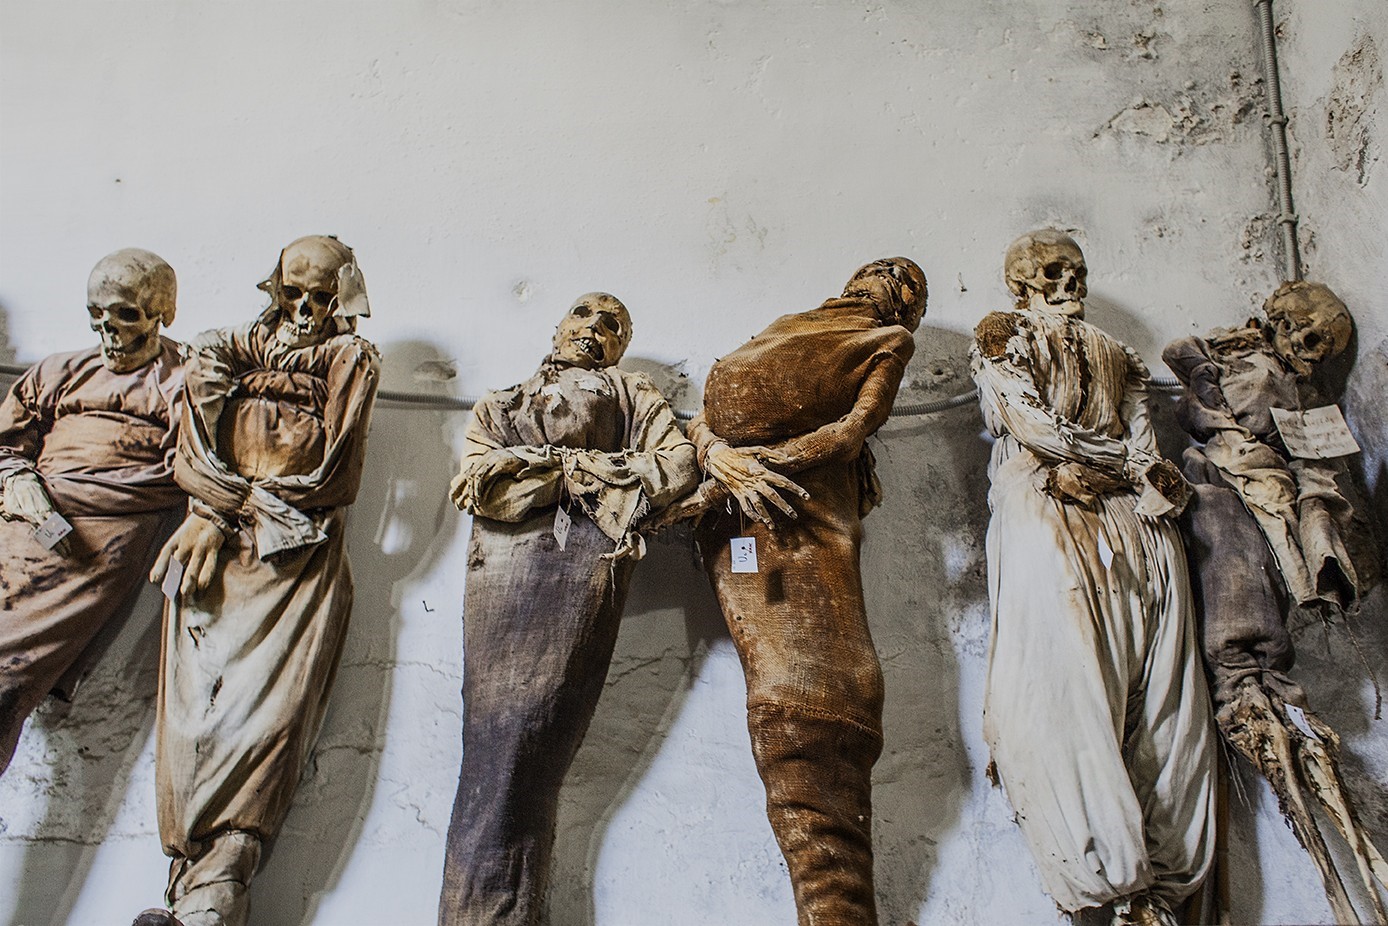 Hanging loose with the bodies from the Capuchin Catacombs | Dazed